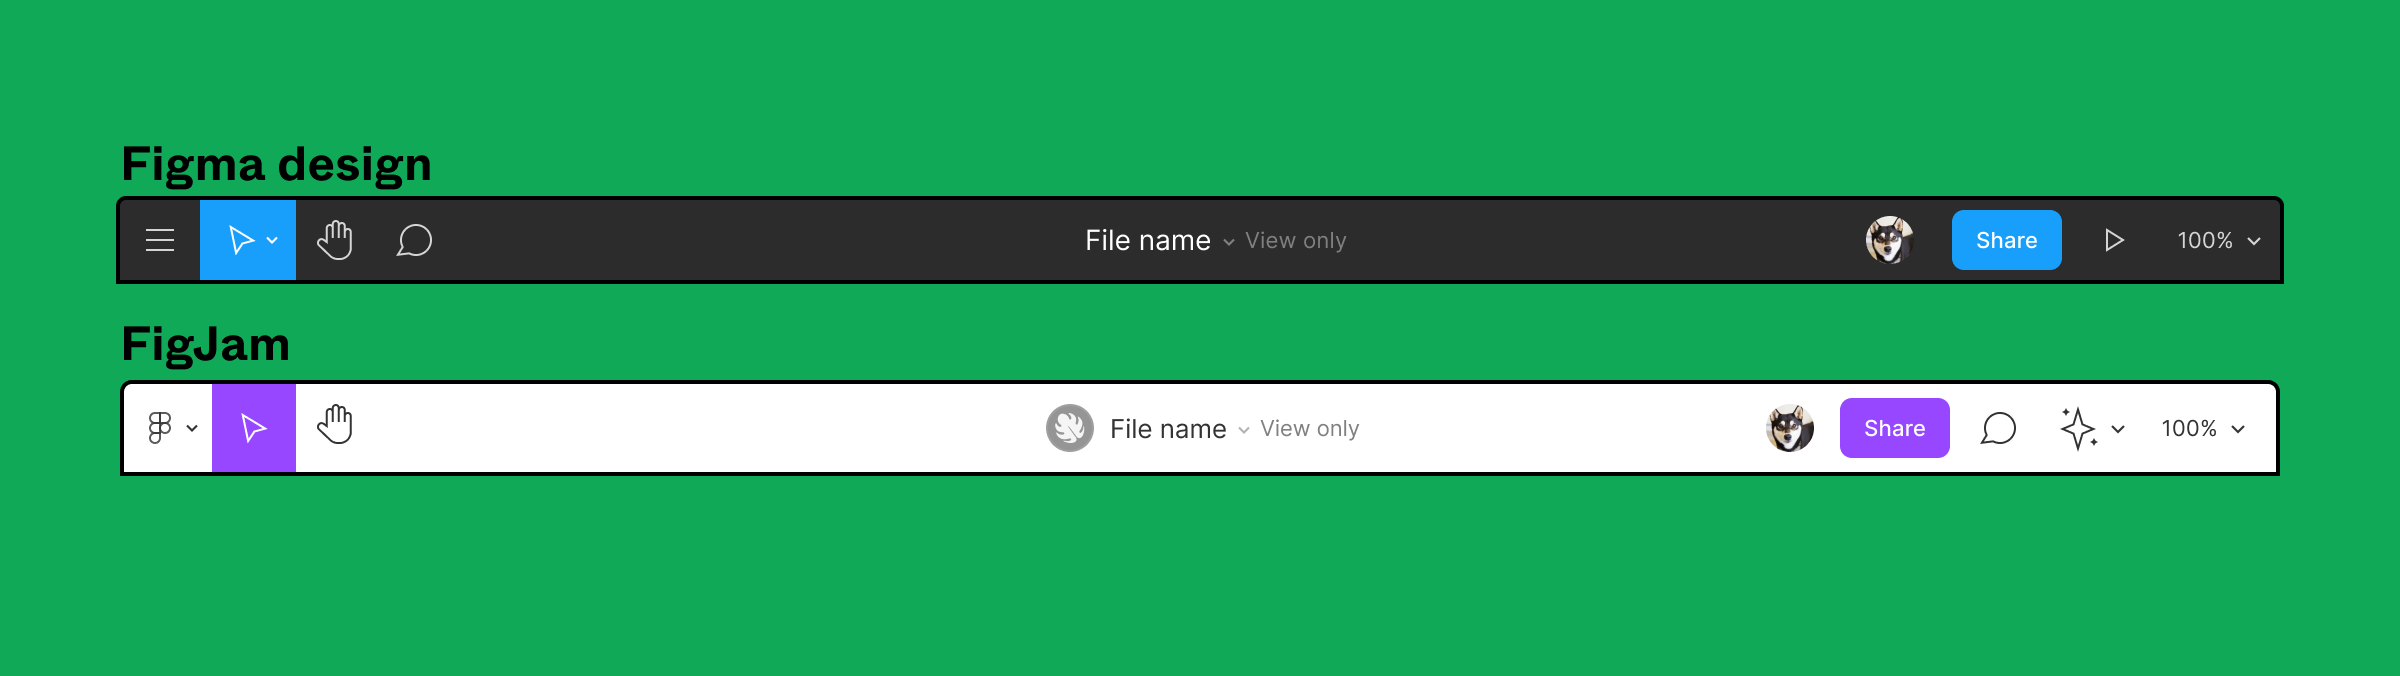 Toolbars in Figma design and FigJam which only have tools for viewing and panning